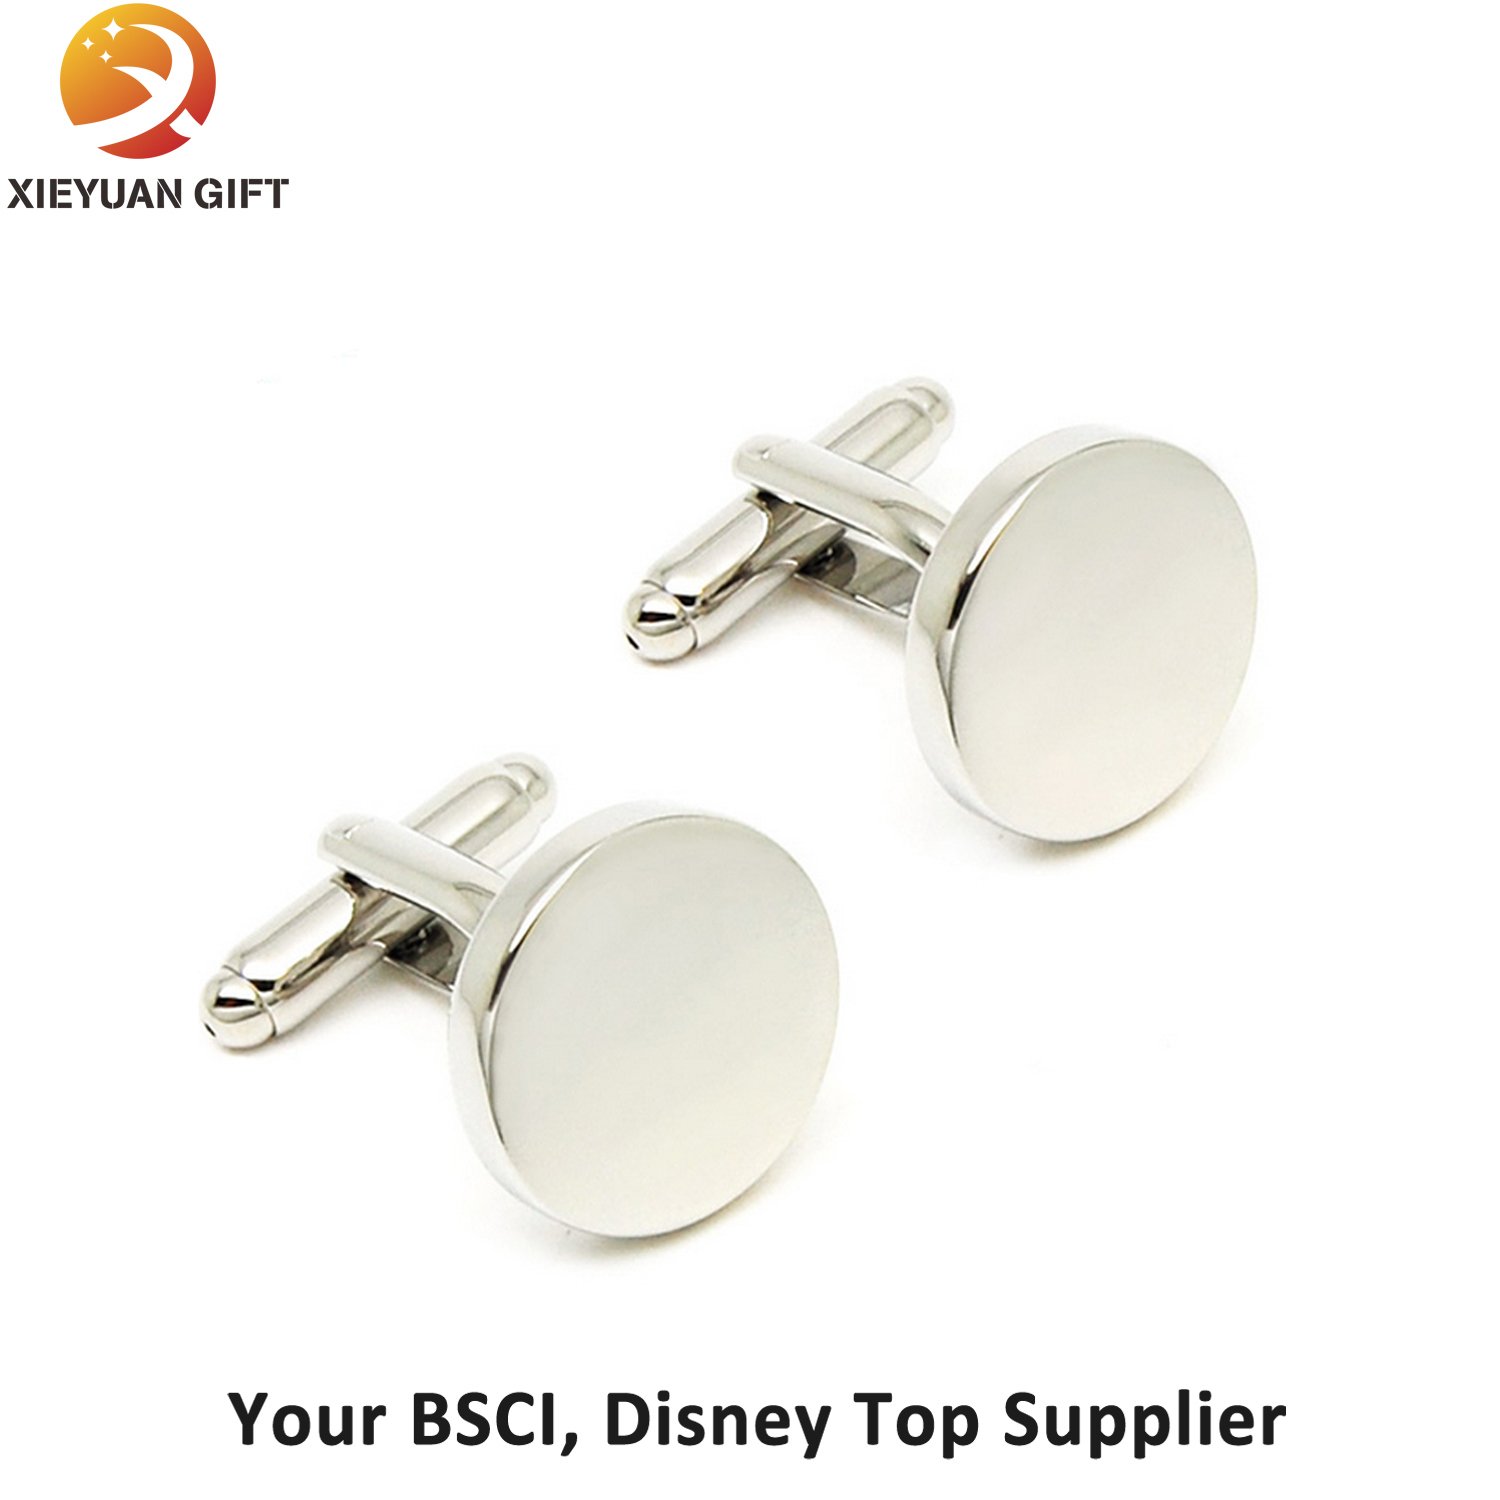 Soft Enamel Process Stainless Steel Cufflink for Gifts